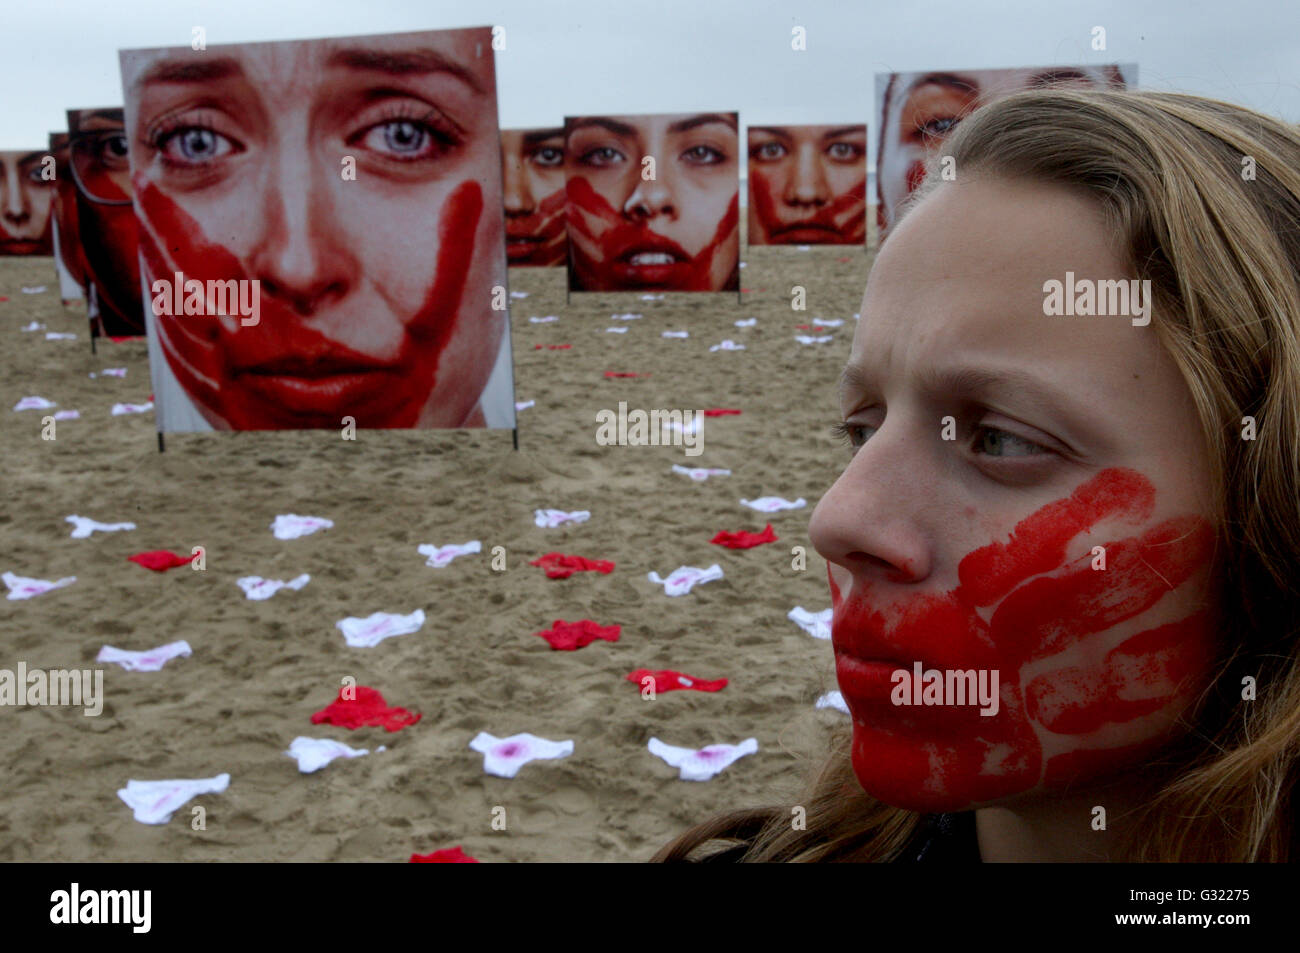 Rio De Janeiro, Brazil. 6th June, 2016. A woman walks in front of images of women displayed during a protest against the abuses to women, at Copacabana Beach, in Rio de Janeiro, Brazil, on June 6, 2016. Credit:  Severino Silva/AGENCIA ESTADO/Xinhua/Alamy Live News Stock Photo